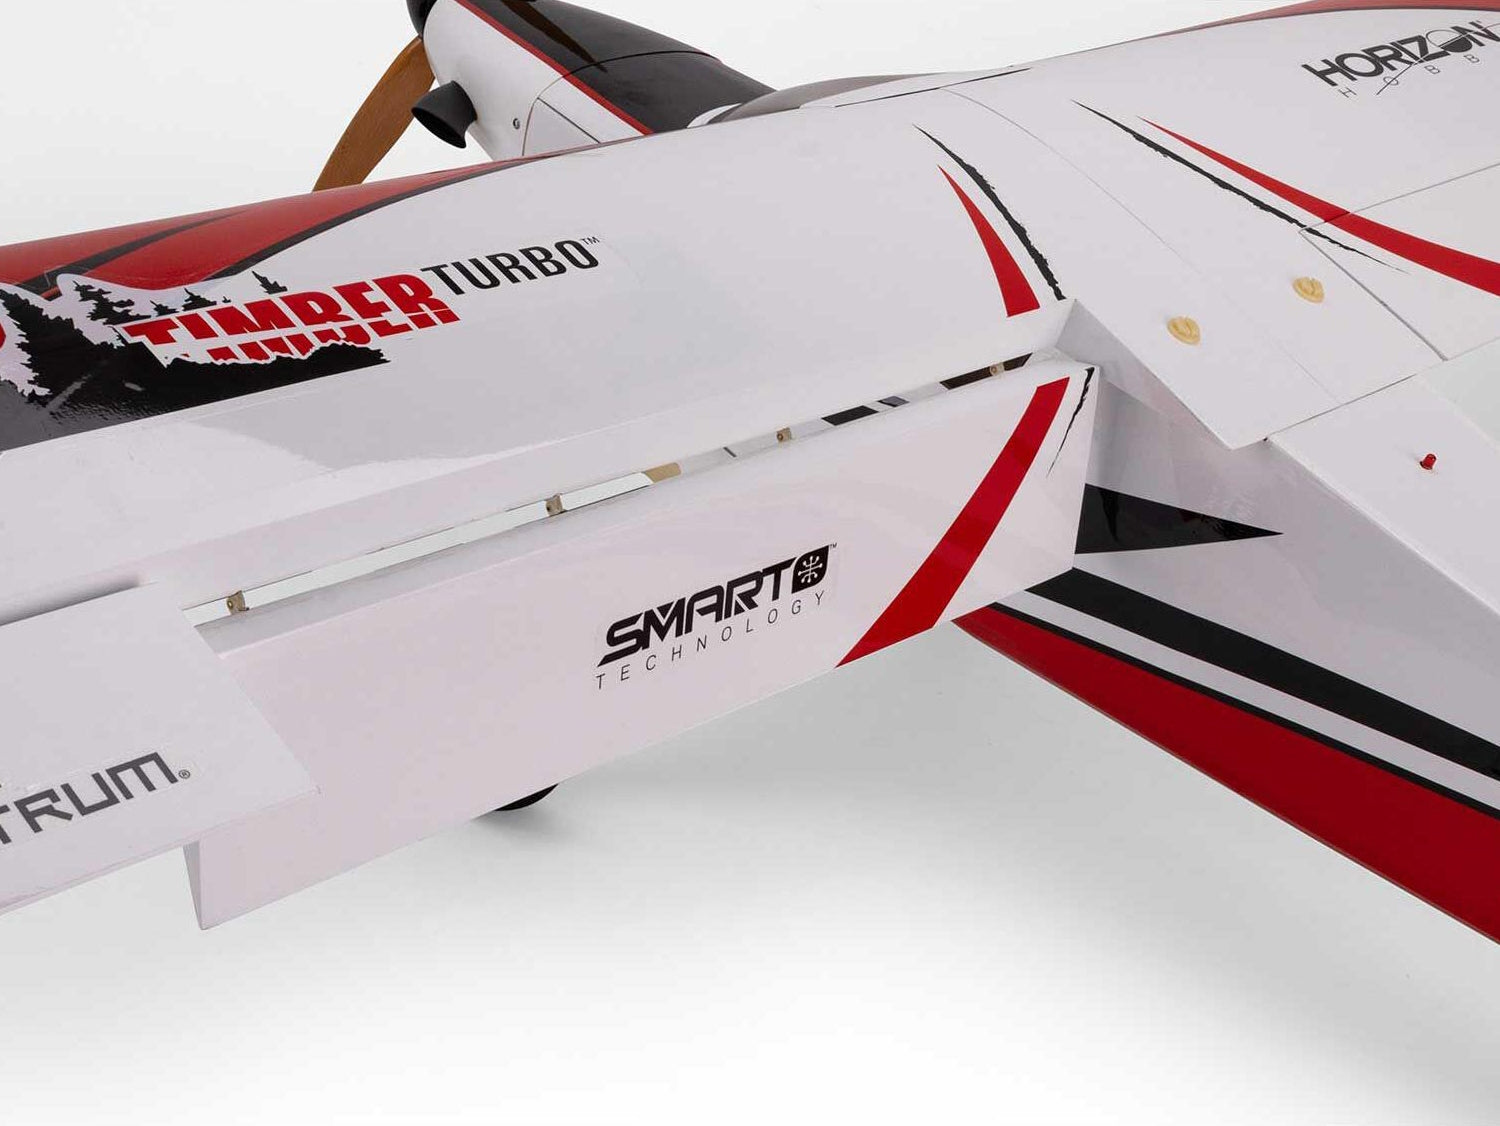 E-Flite Turbo Timber SWS 2.0m BNF Basic with AS3X and SAFE Select EFL71750